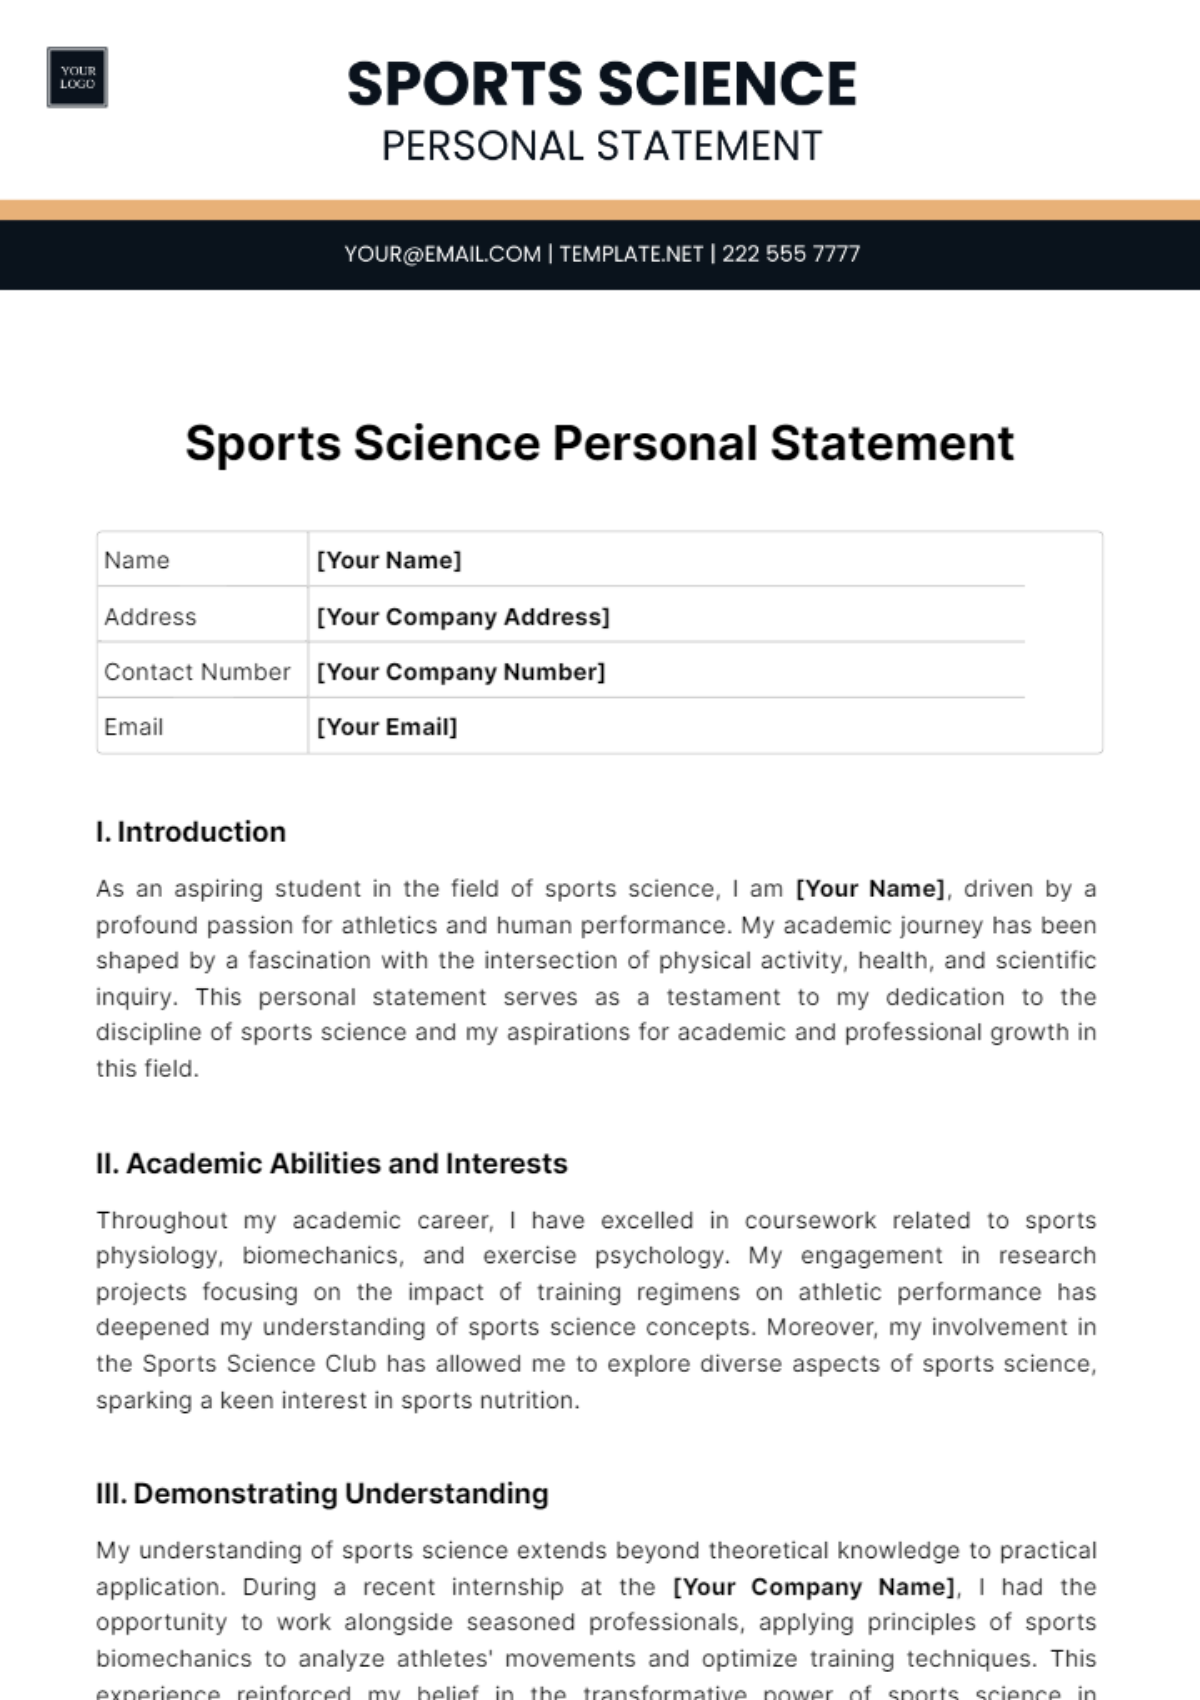 Sports Science Personal Statement Template